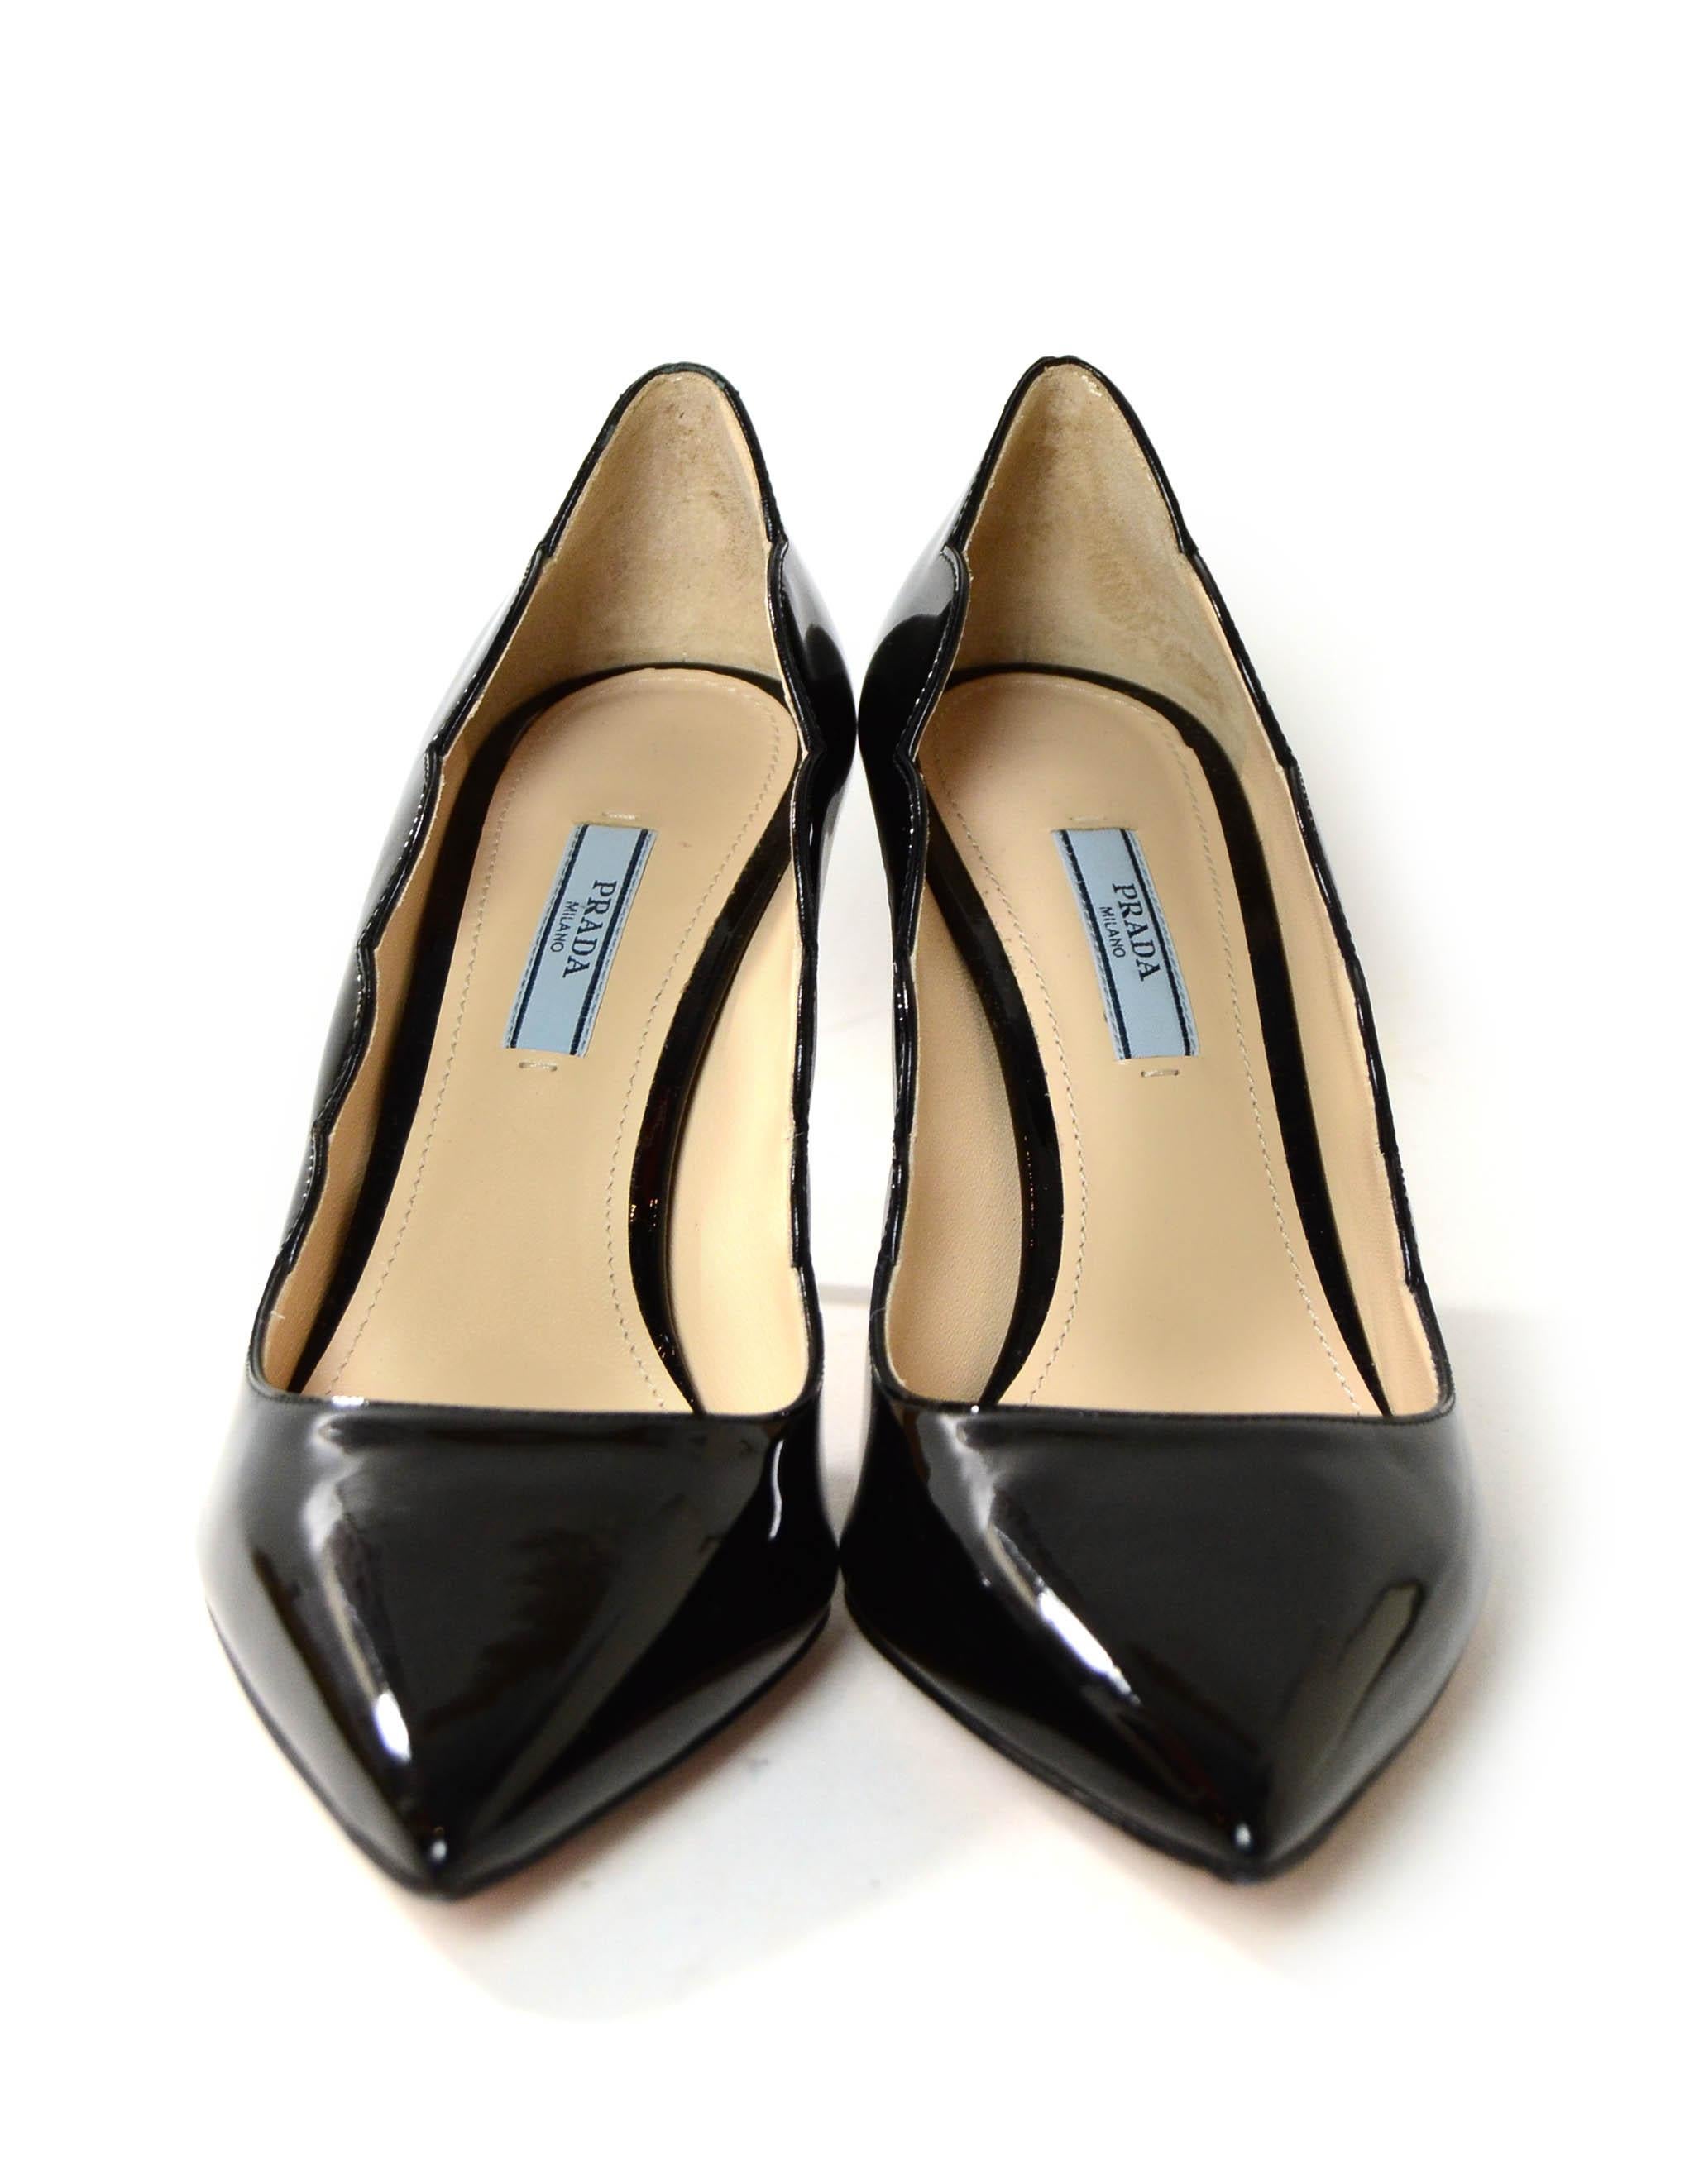 Prada Black Patent Pointed Heels w/ Scallop Edges sz 39.5 In New Condition In New York, NY